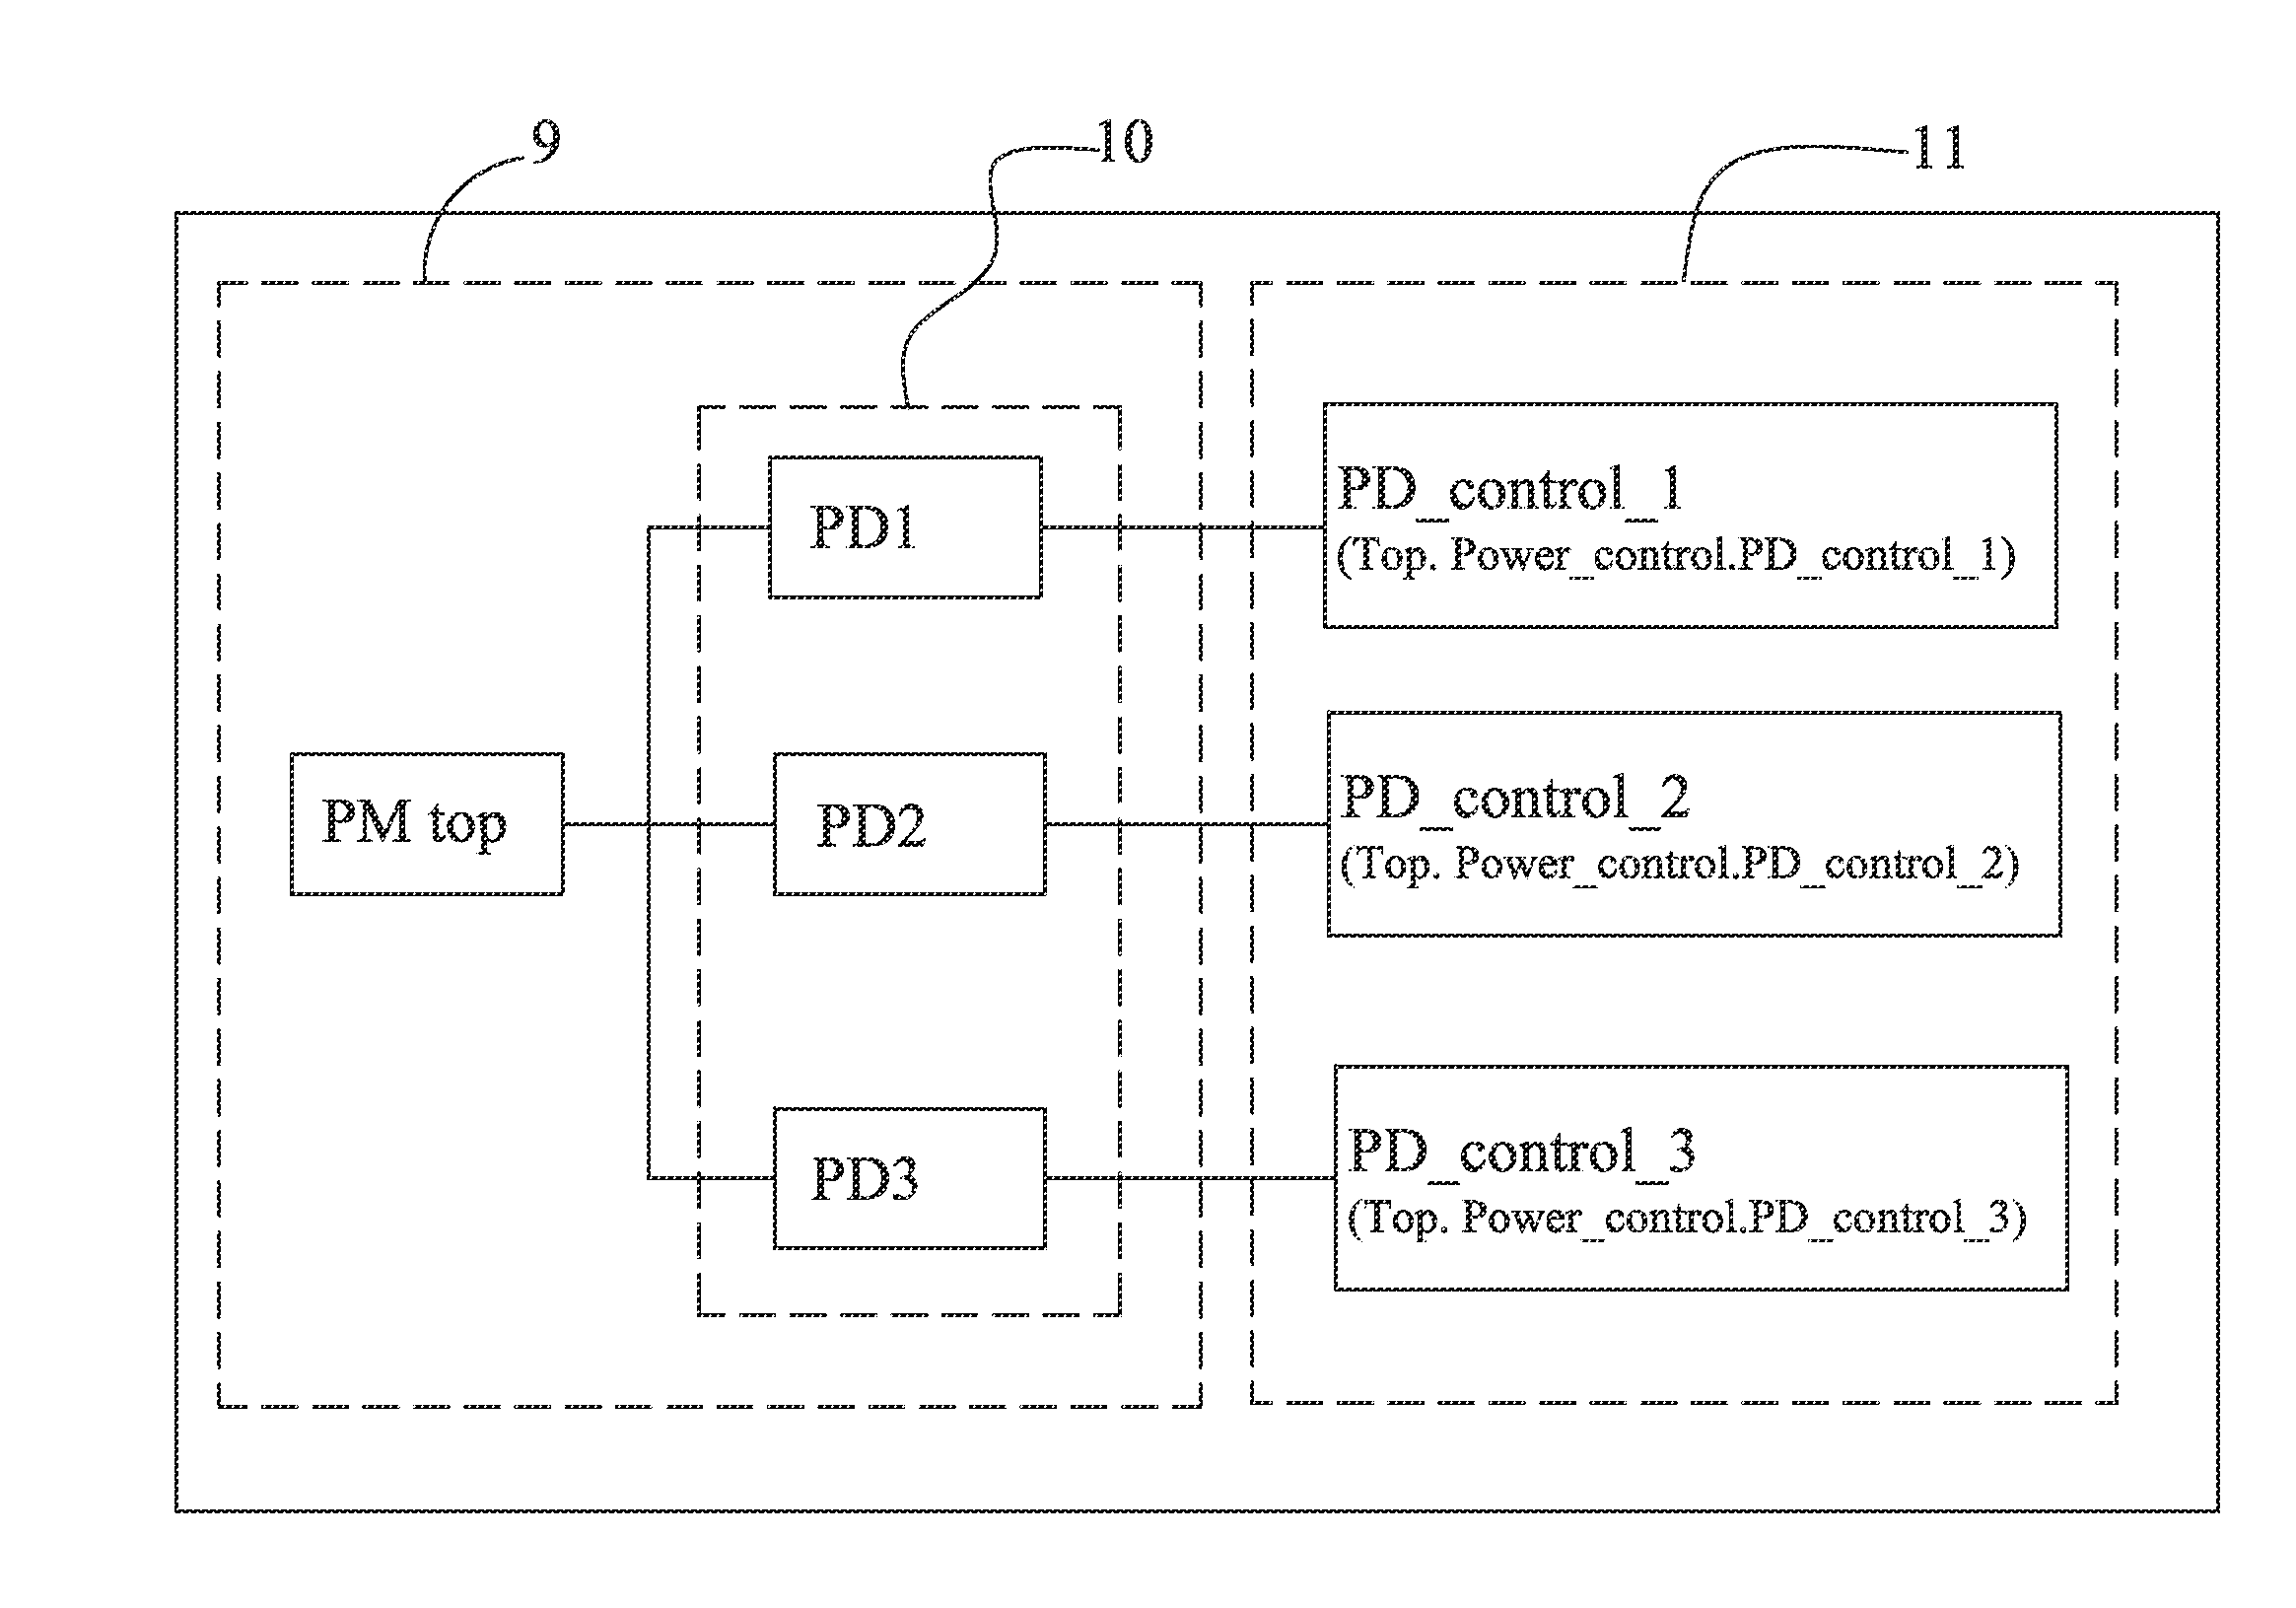 Hierarchical power map for low power design